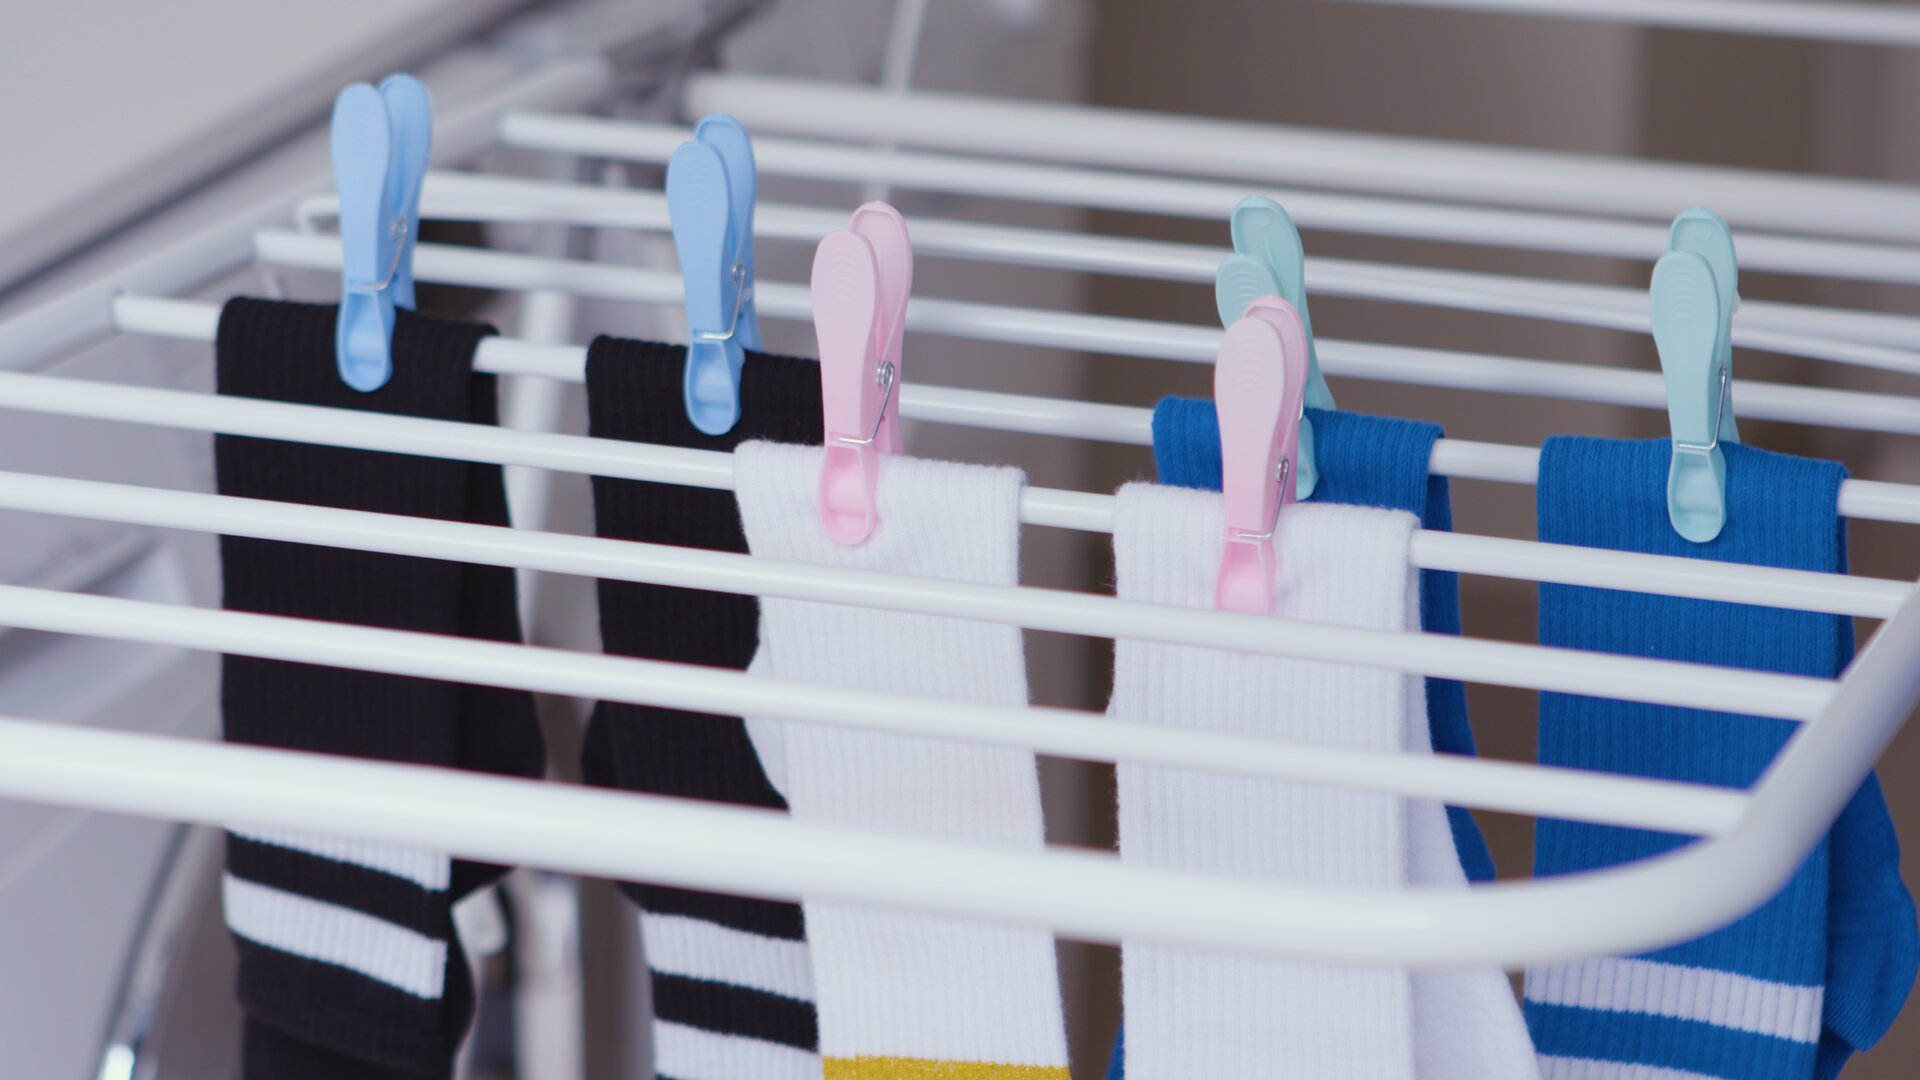 Use Clothes Airers & Drying Racks To Easily Dry Your Clothes